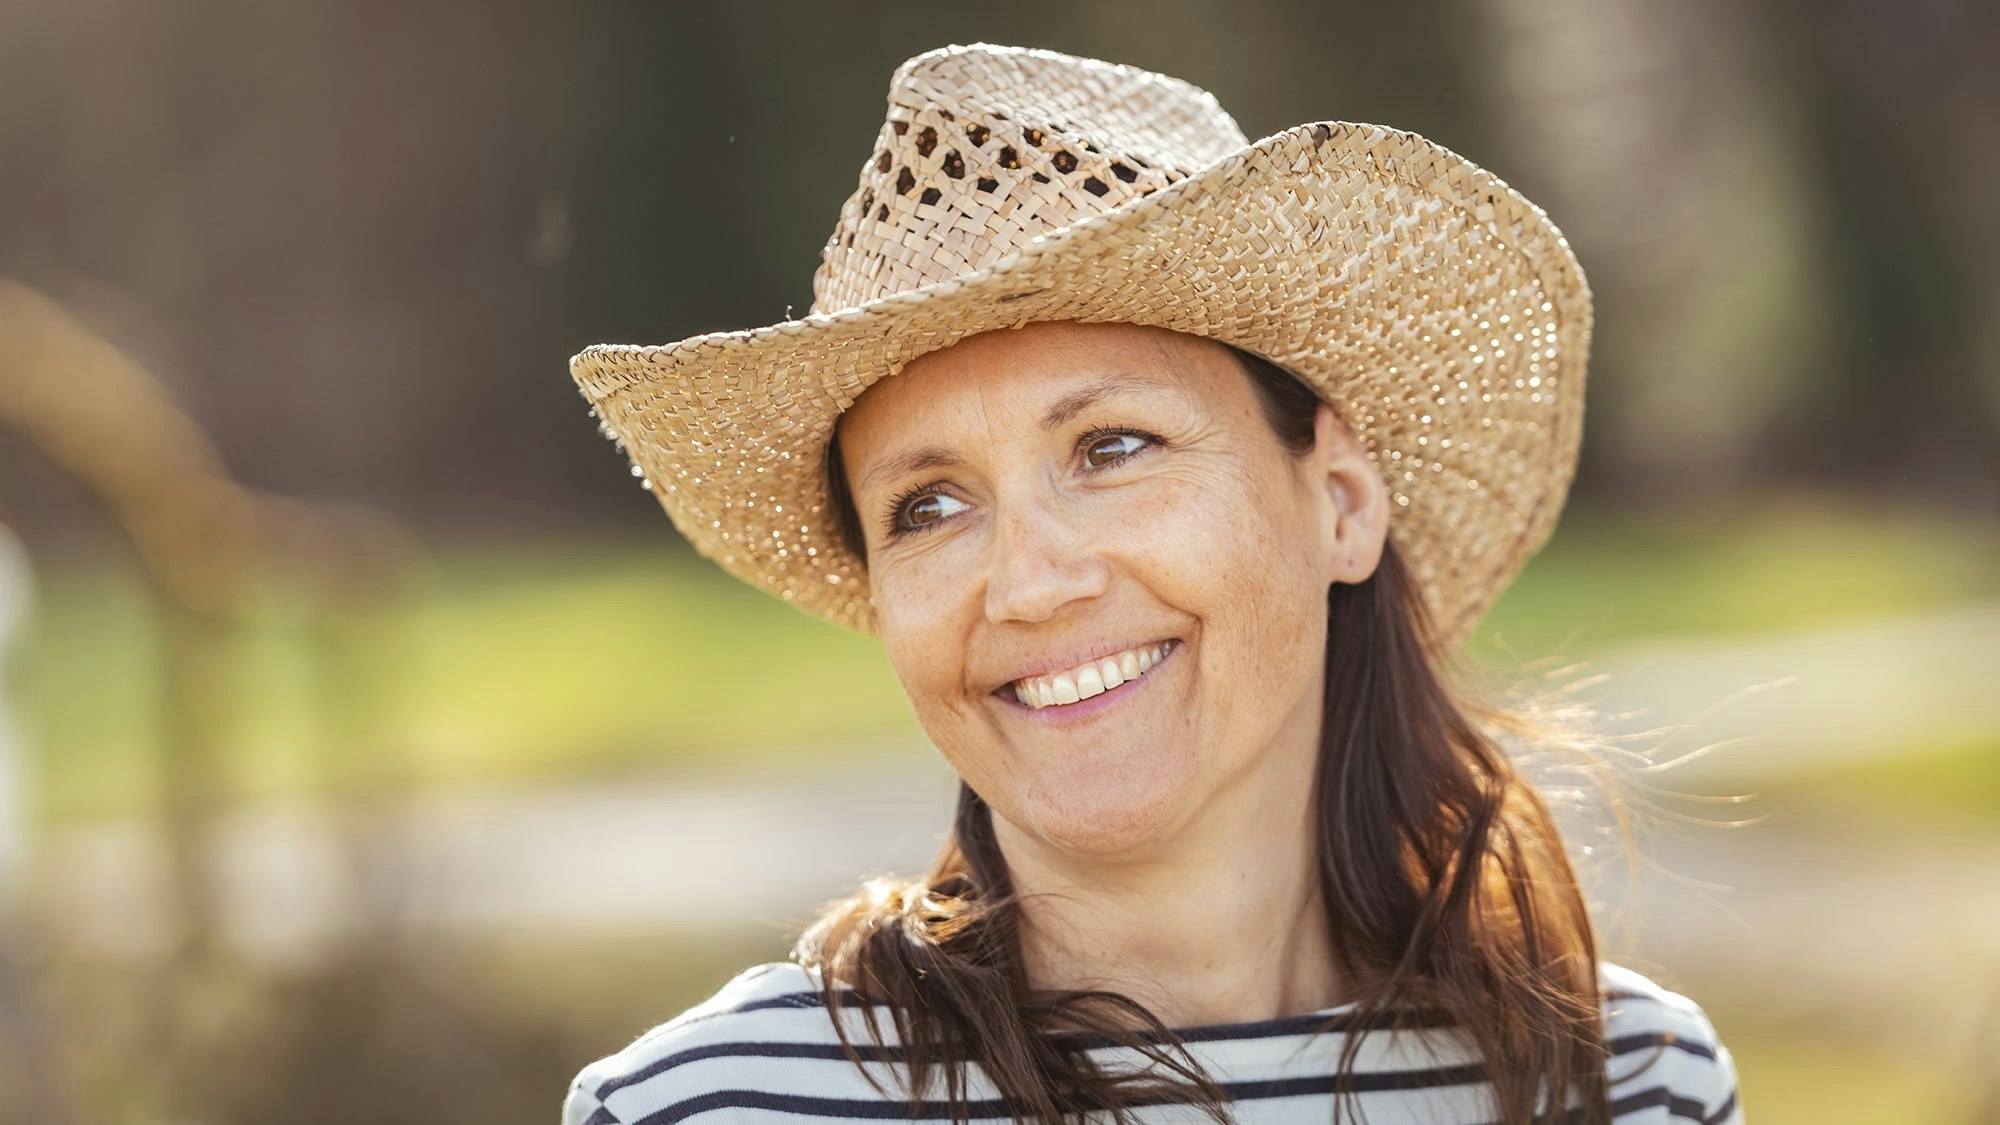 Woman with straw hat and navy shirt outside in nature